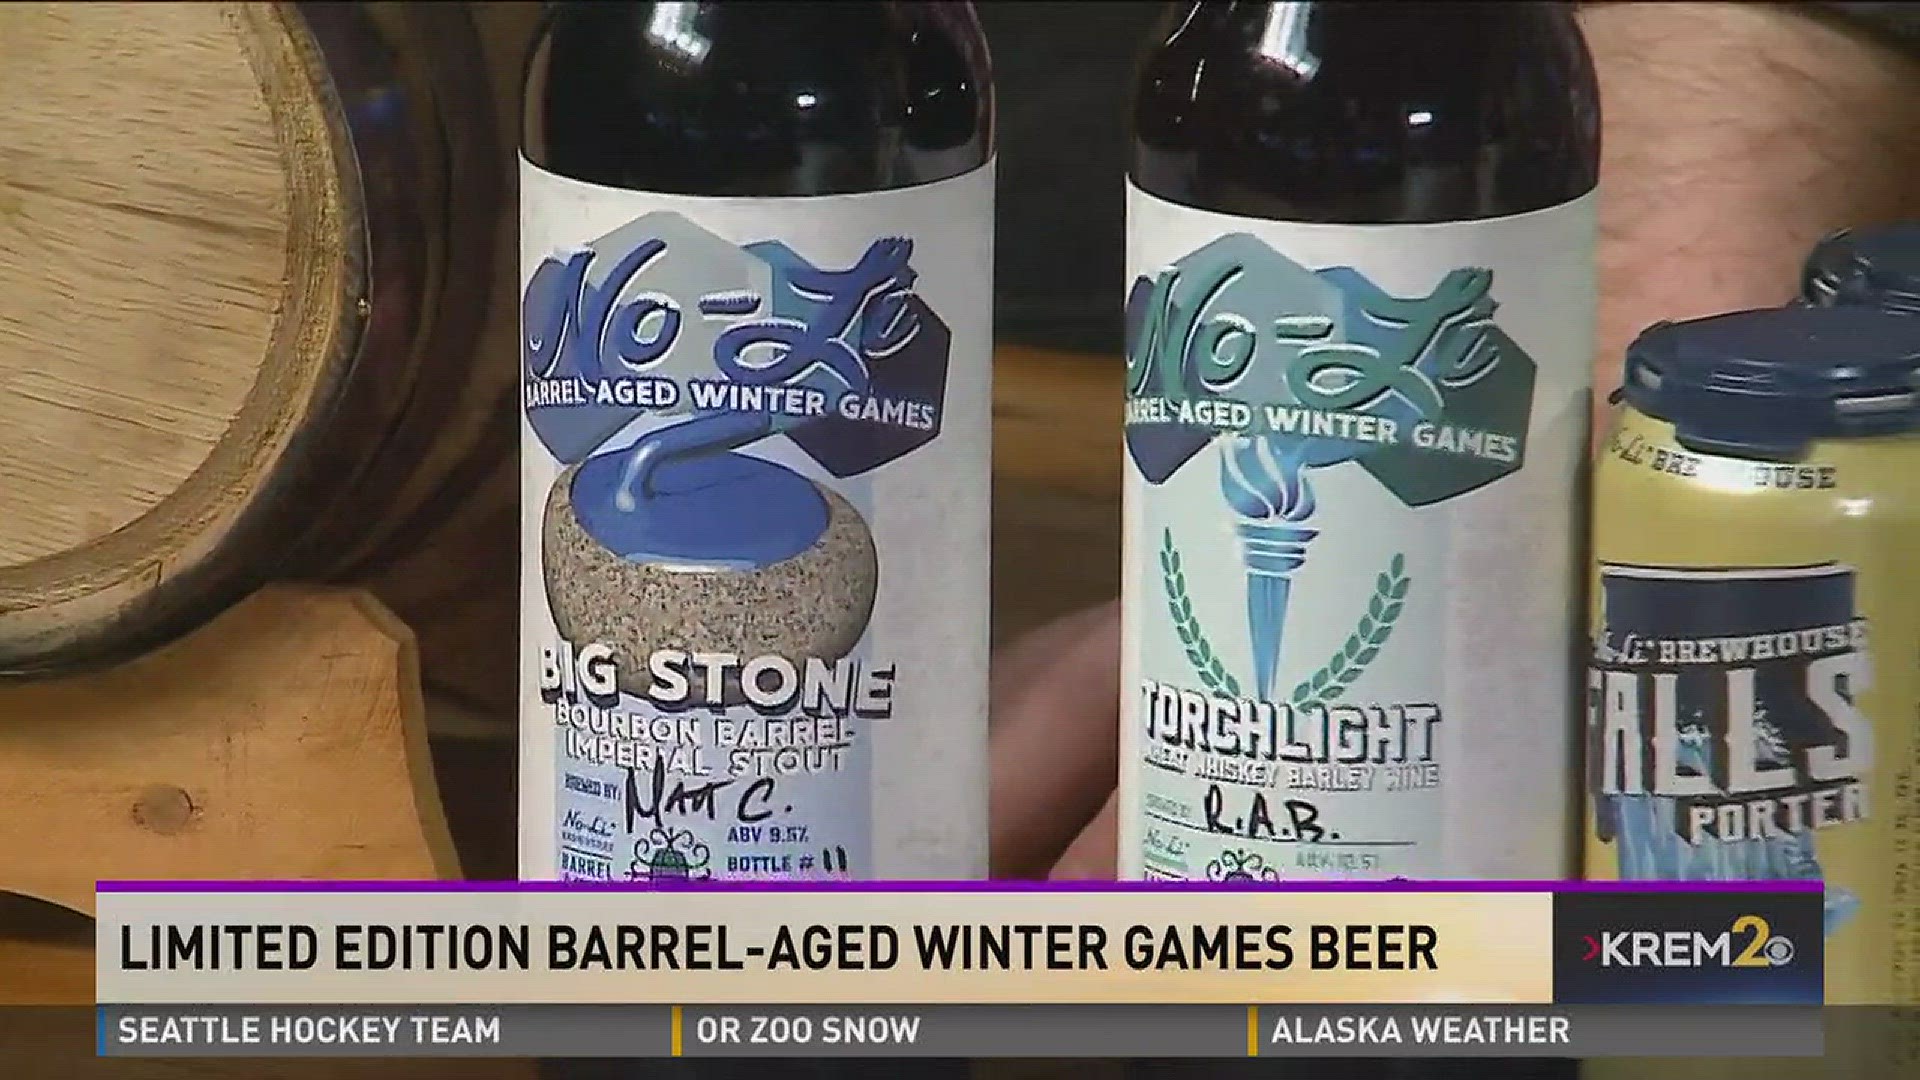 No-Li releases limited edition barrel-aged winter games beer  (2-21-18)